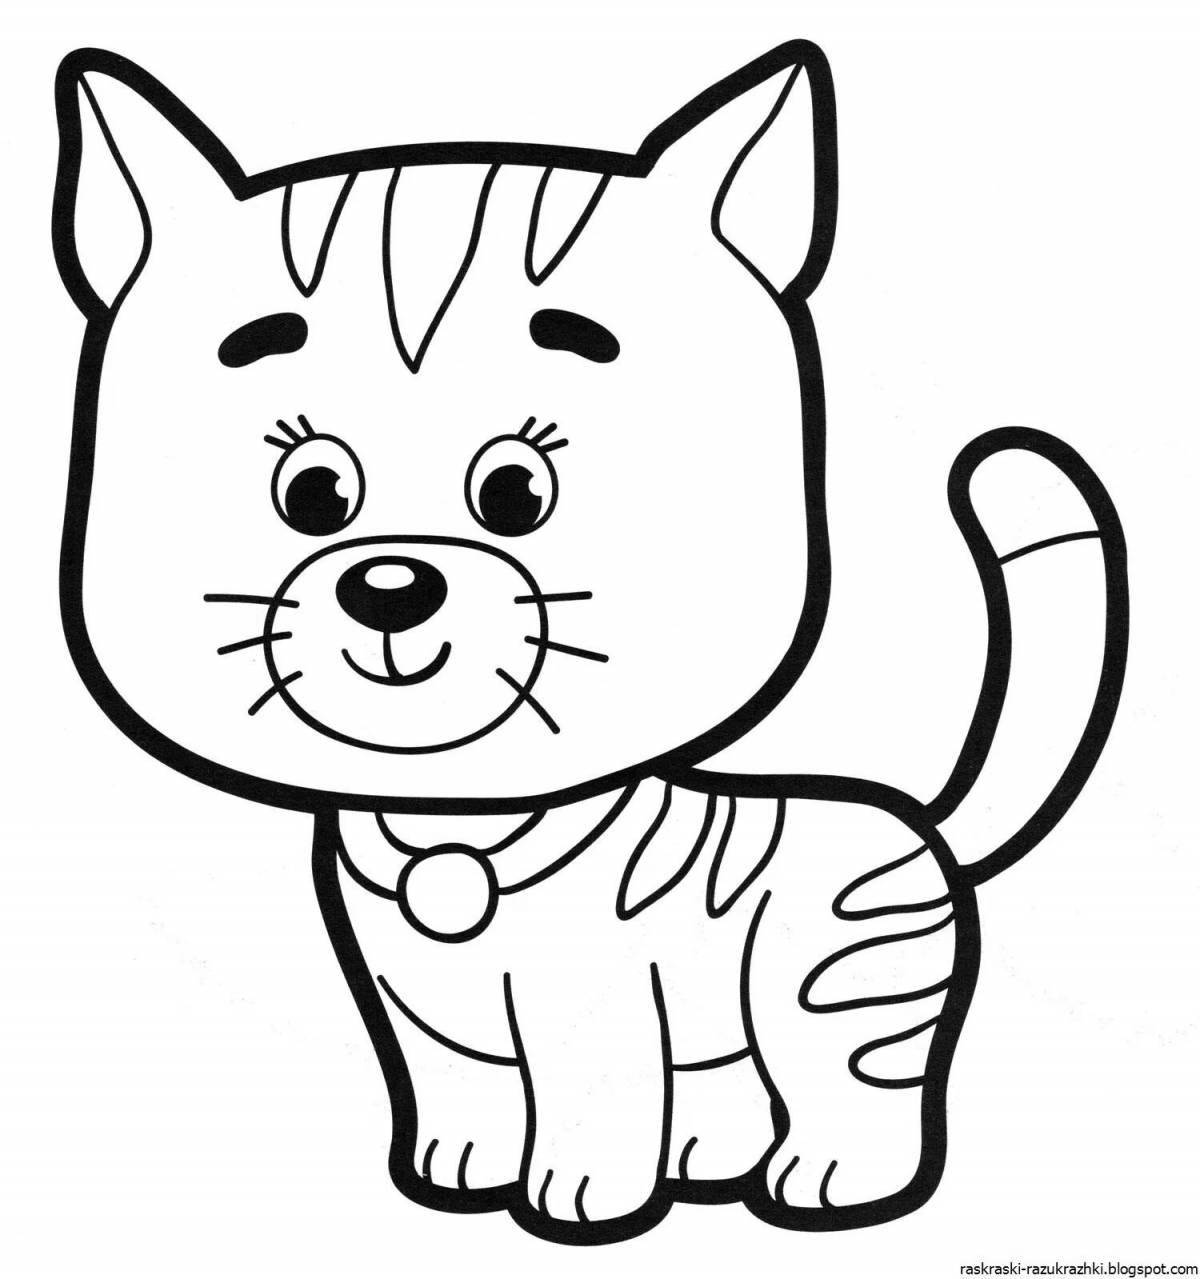 Colourful cat toy coloring book